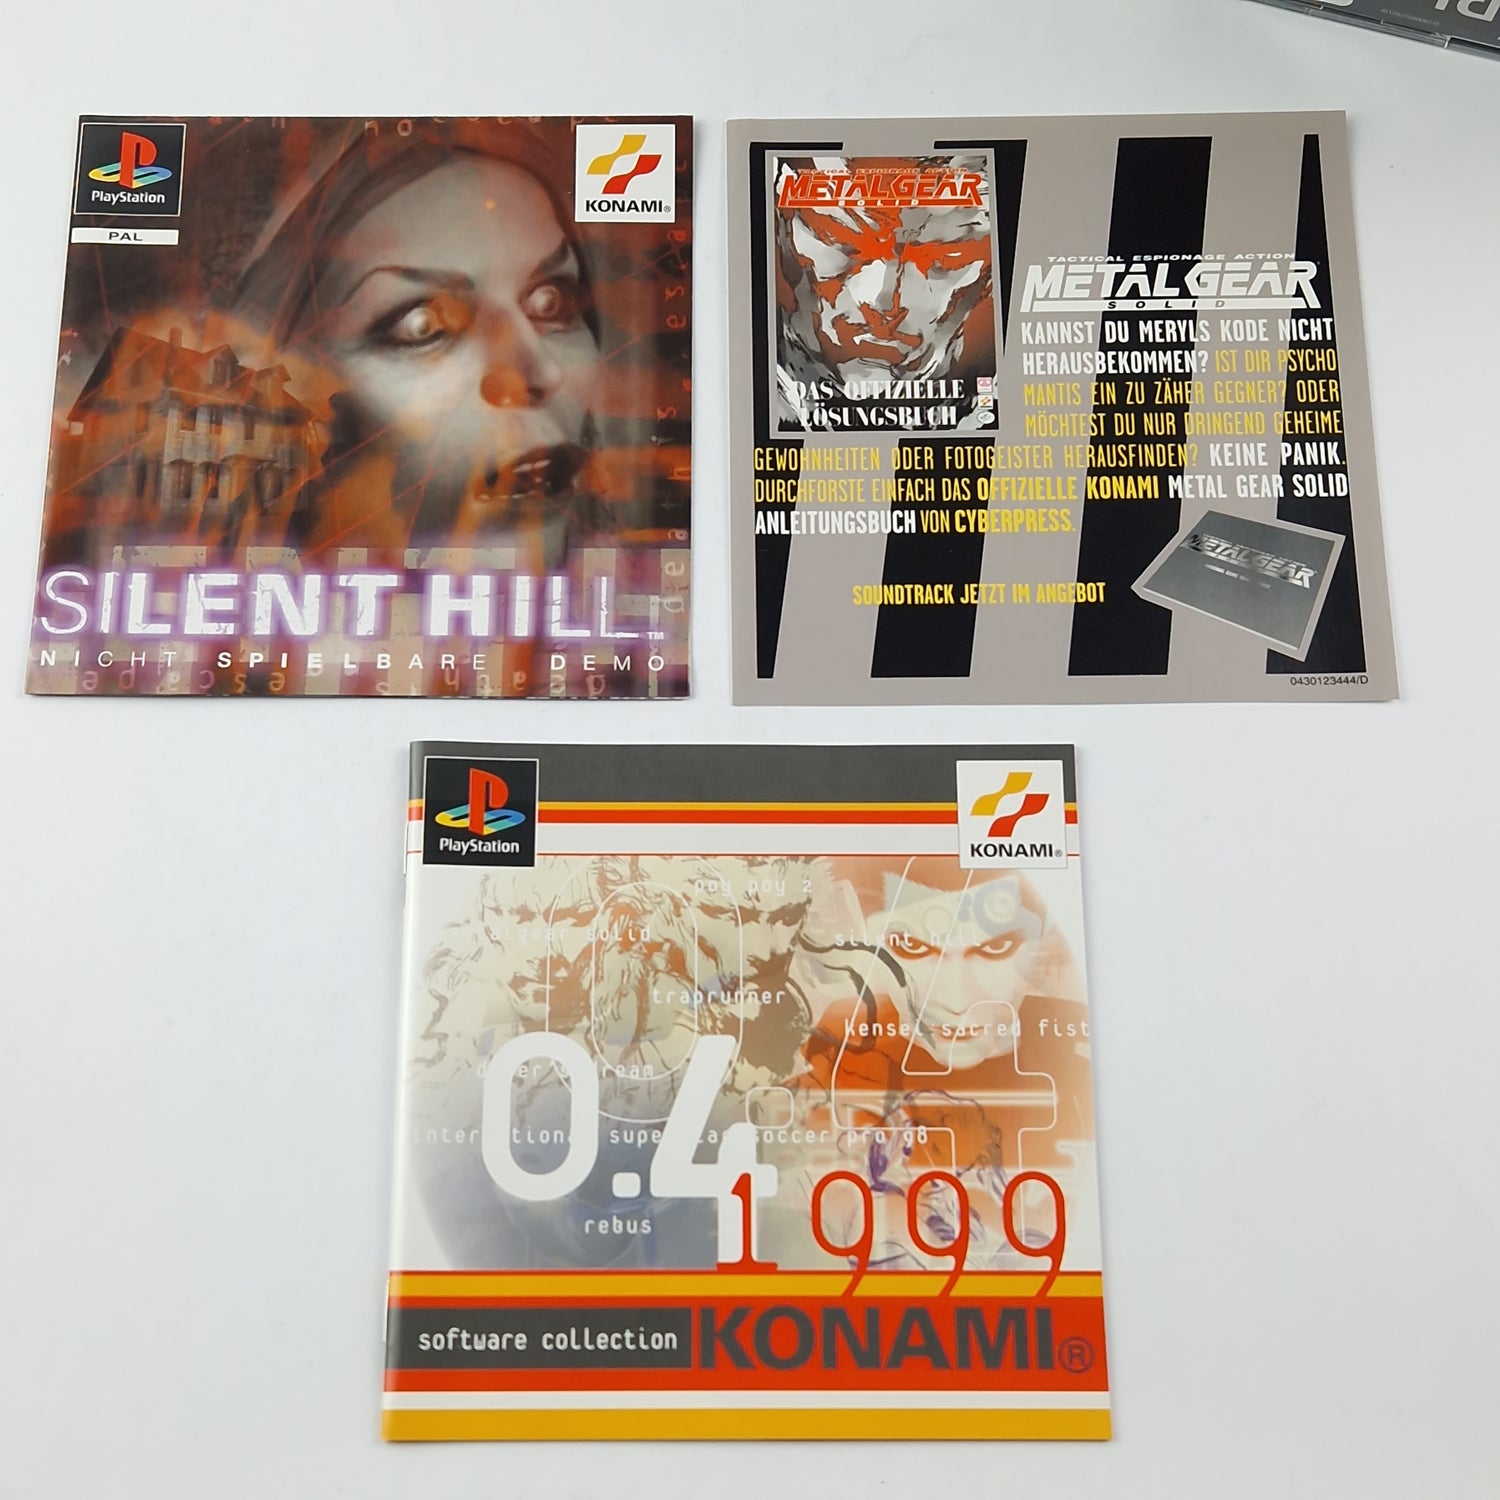 Playstation 1 Spiel : Metal Gear Solid Limited Premium Edition Package - PS1 OVP